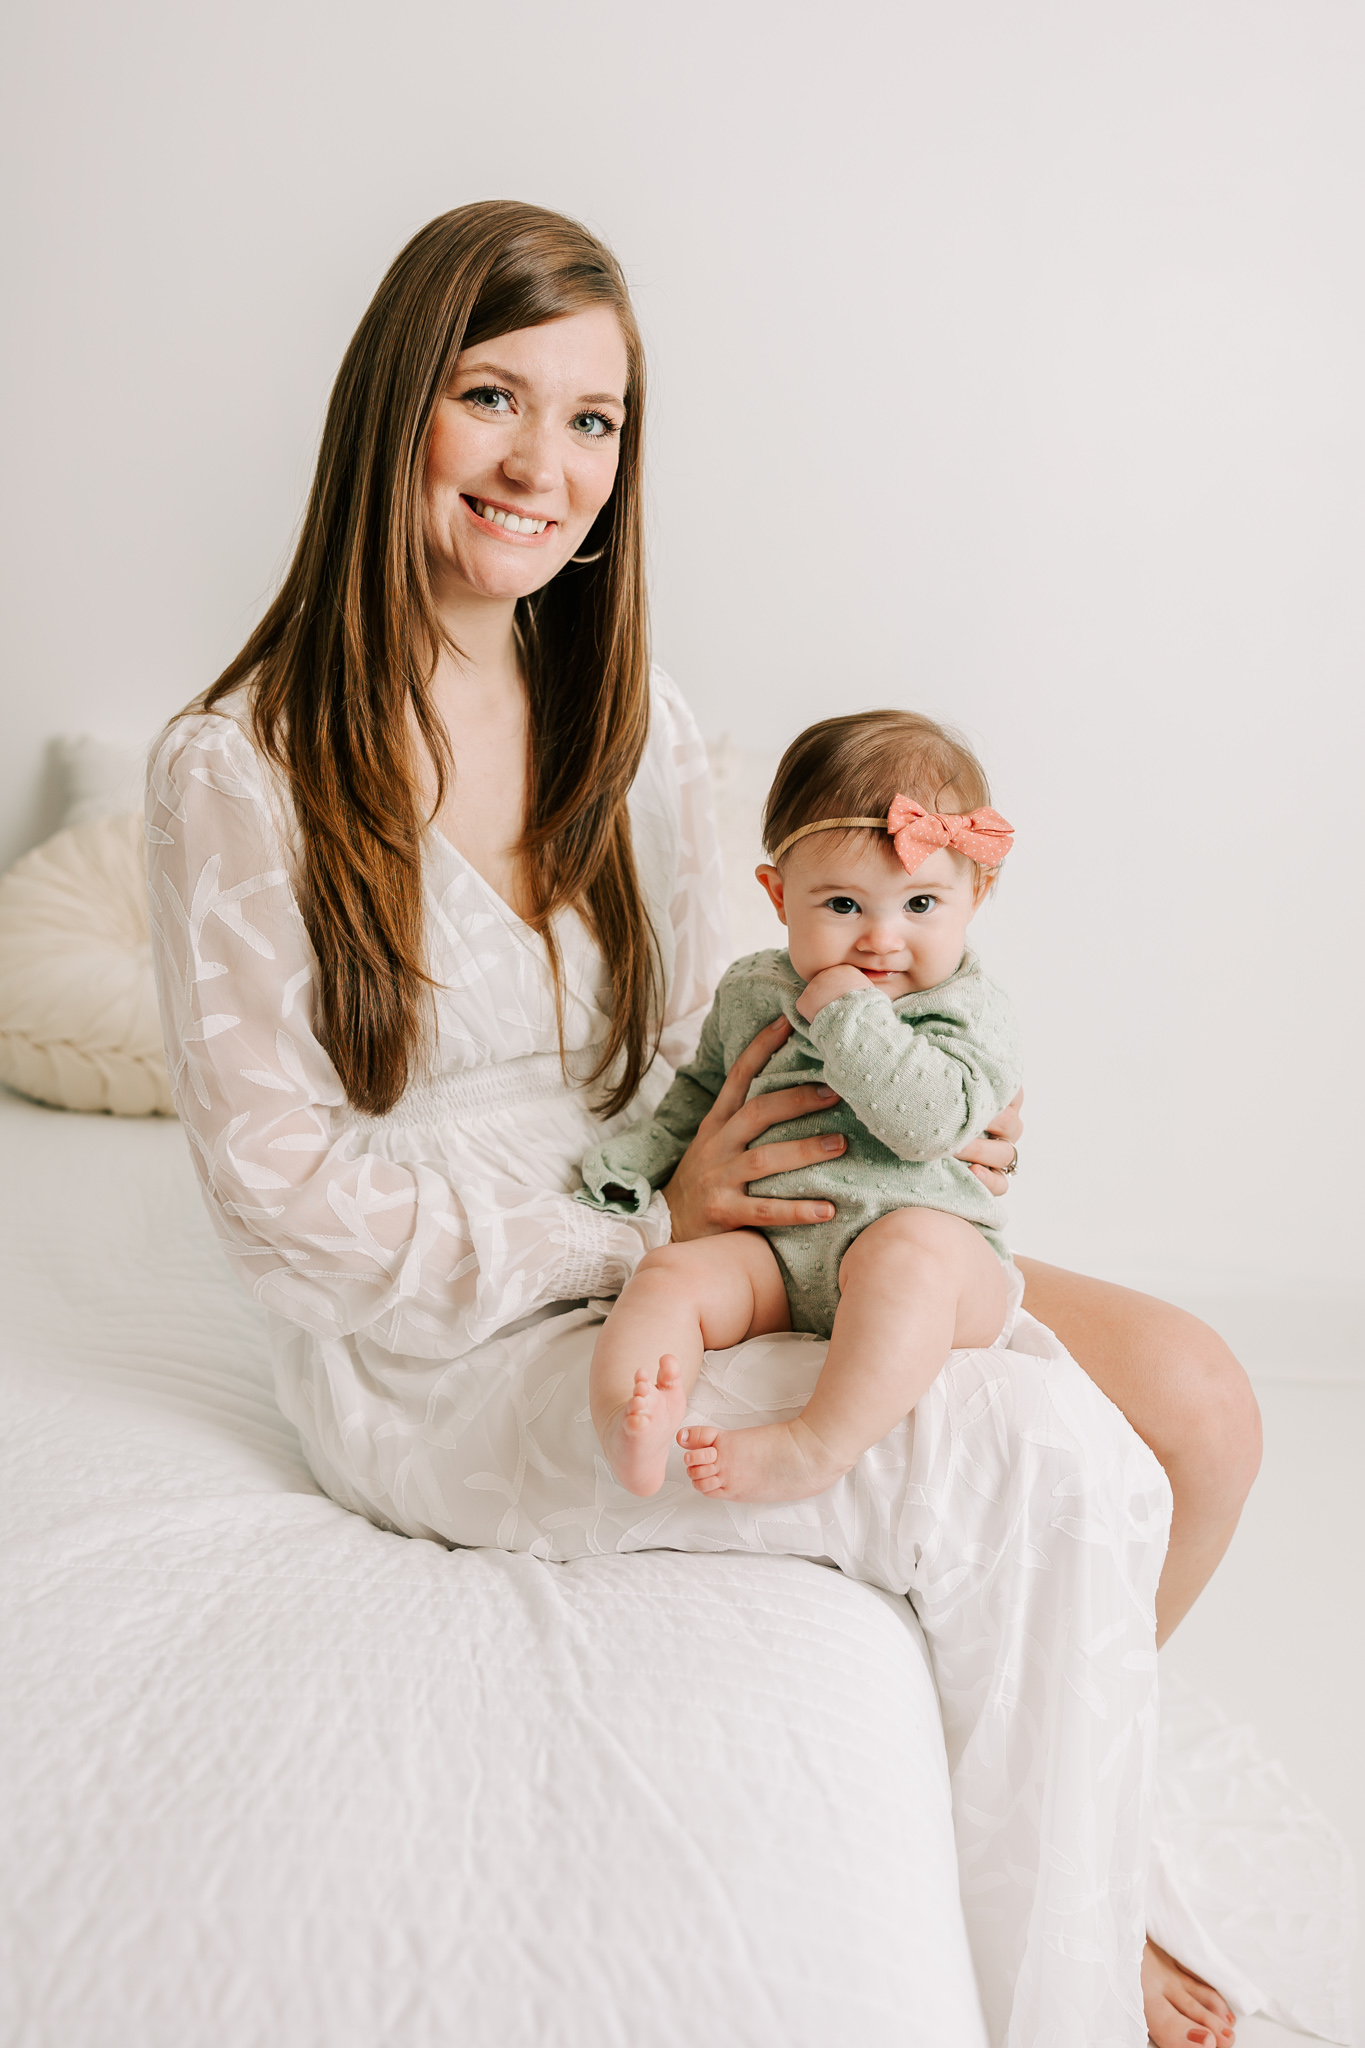 Mom and daughter sharing a smile on the bed in the studio of molly berry photography. mom is using one of the lactation consultant Atlanta GA for her breastfeeding questions.